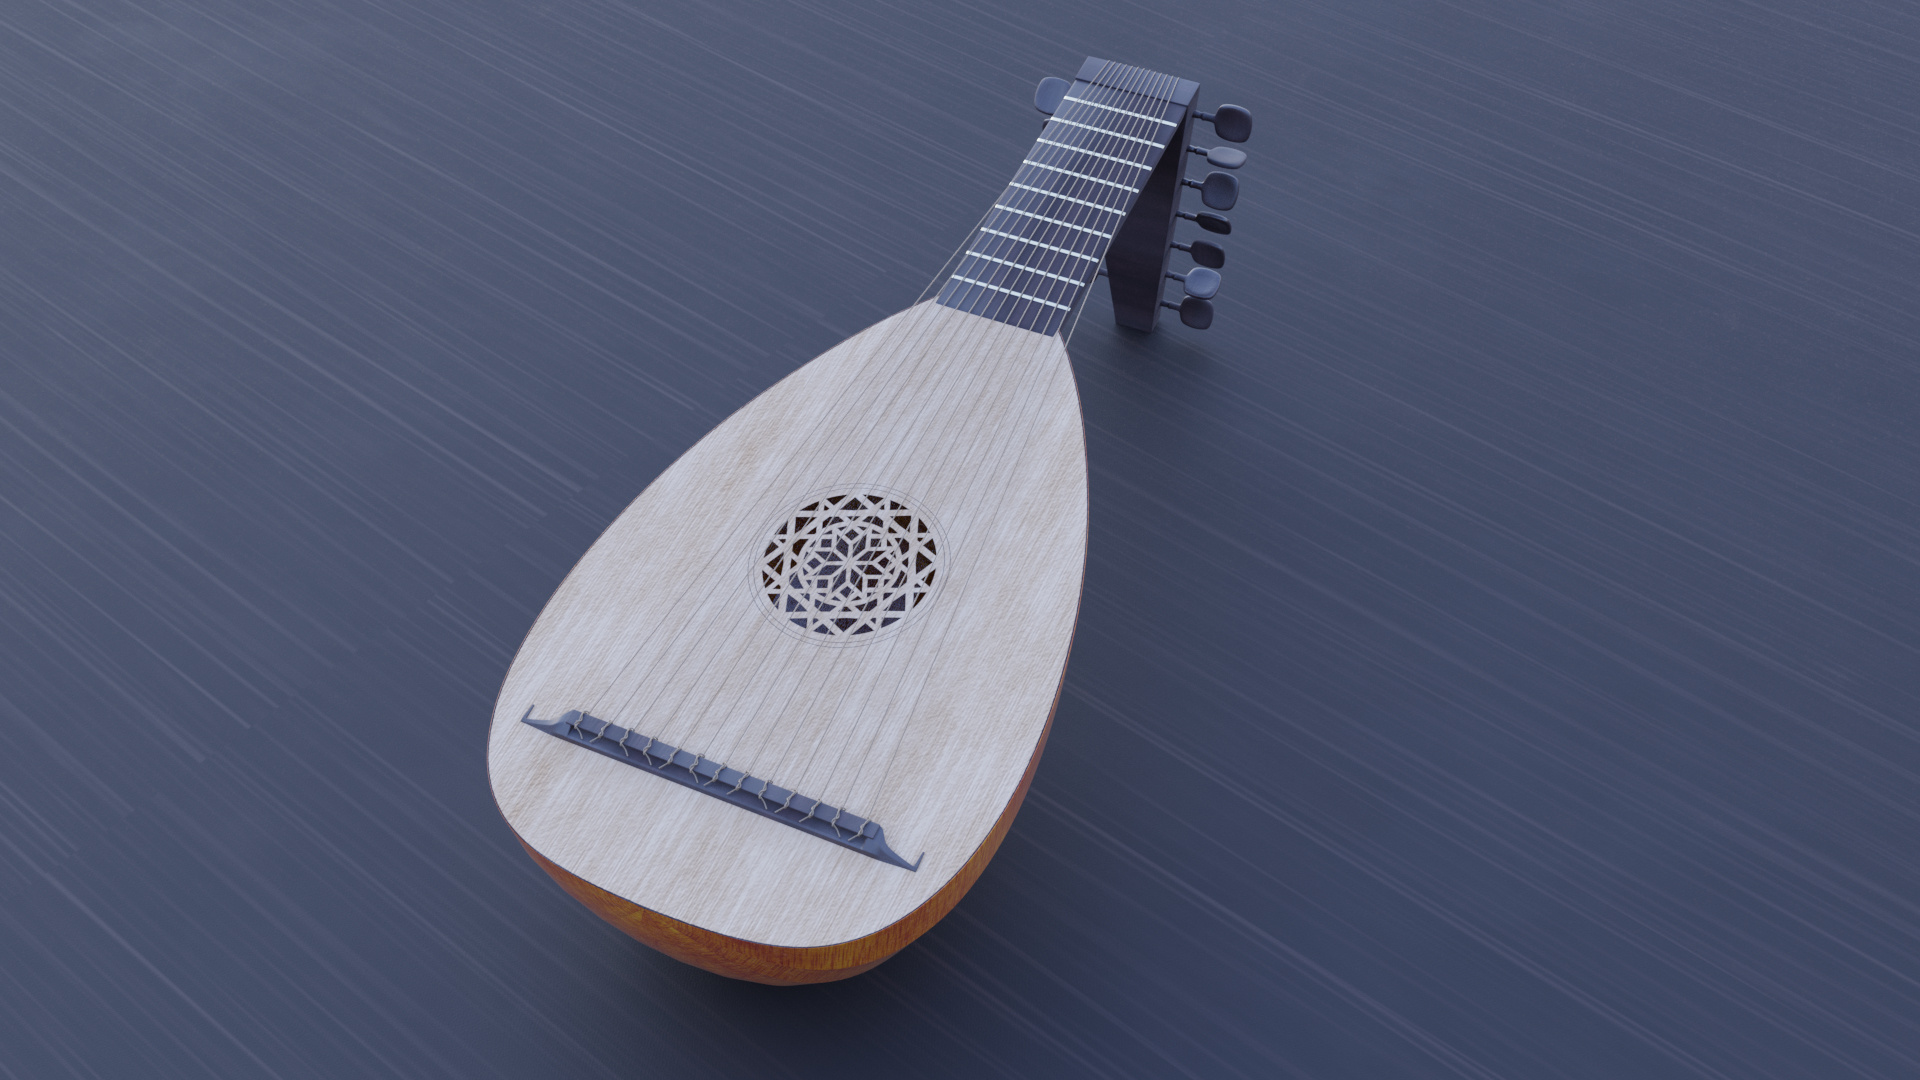 Lute: 3D-Modeling Of A Musical Instrument Accessory, Natural Material Texture, Folk Instrument. 1920x1080 Full HD Background.